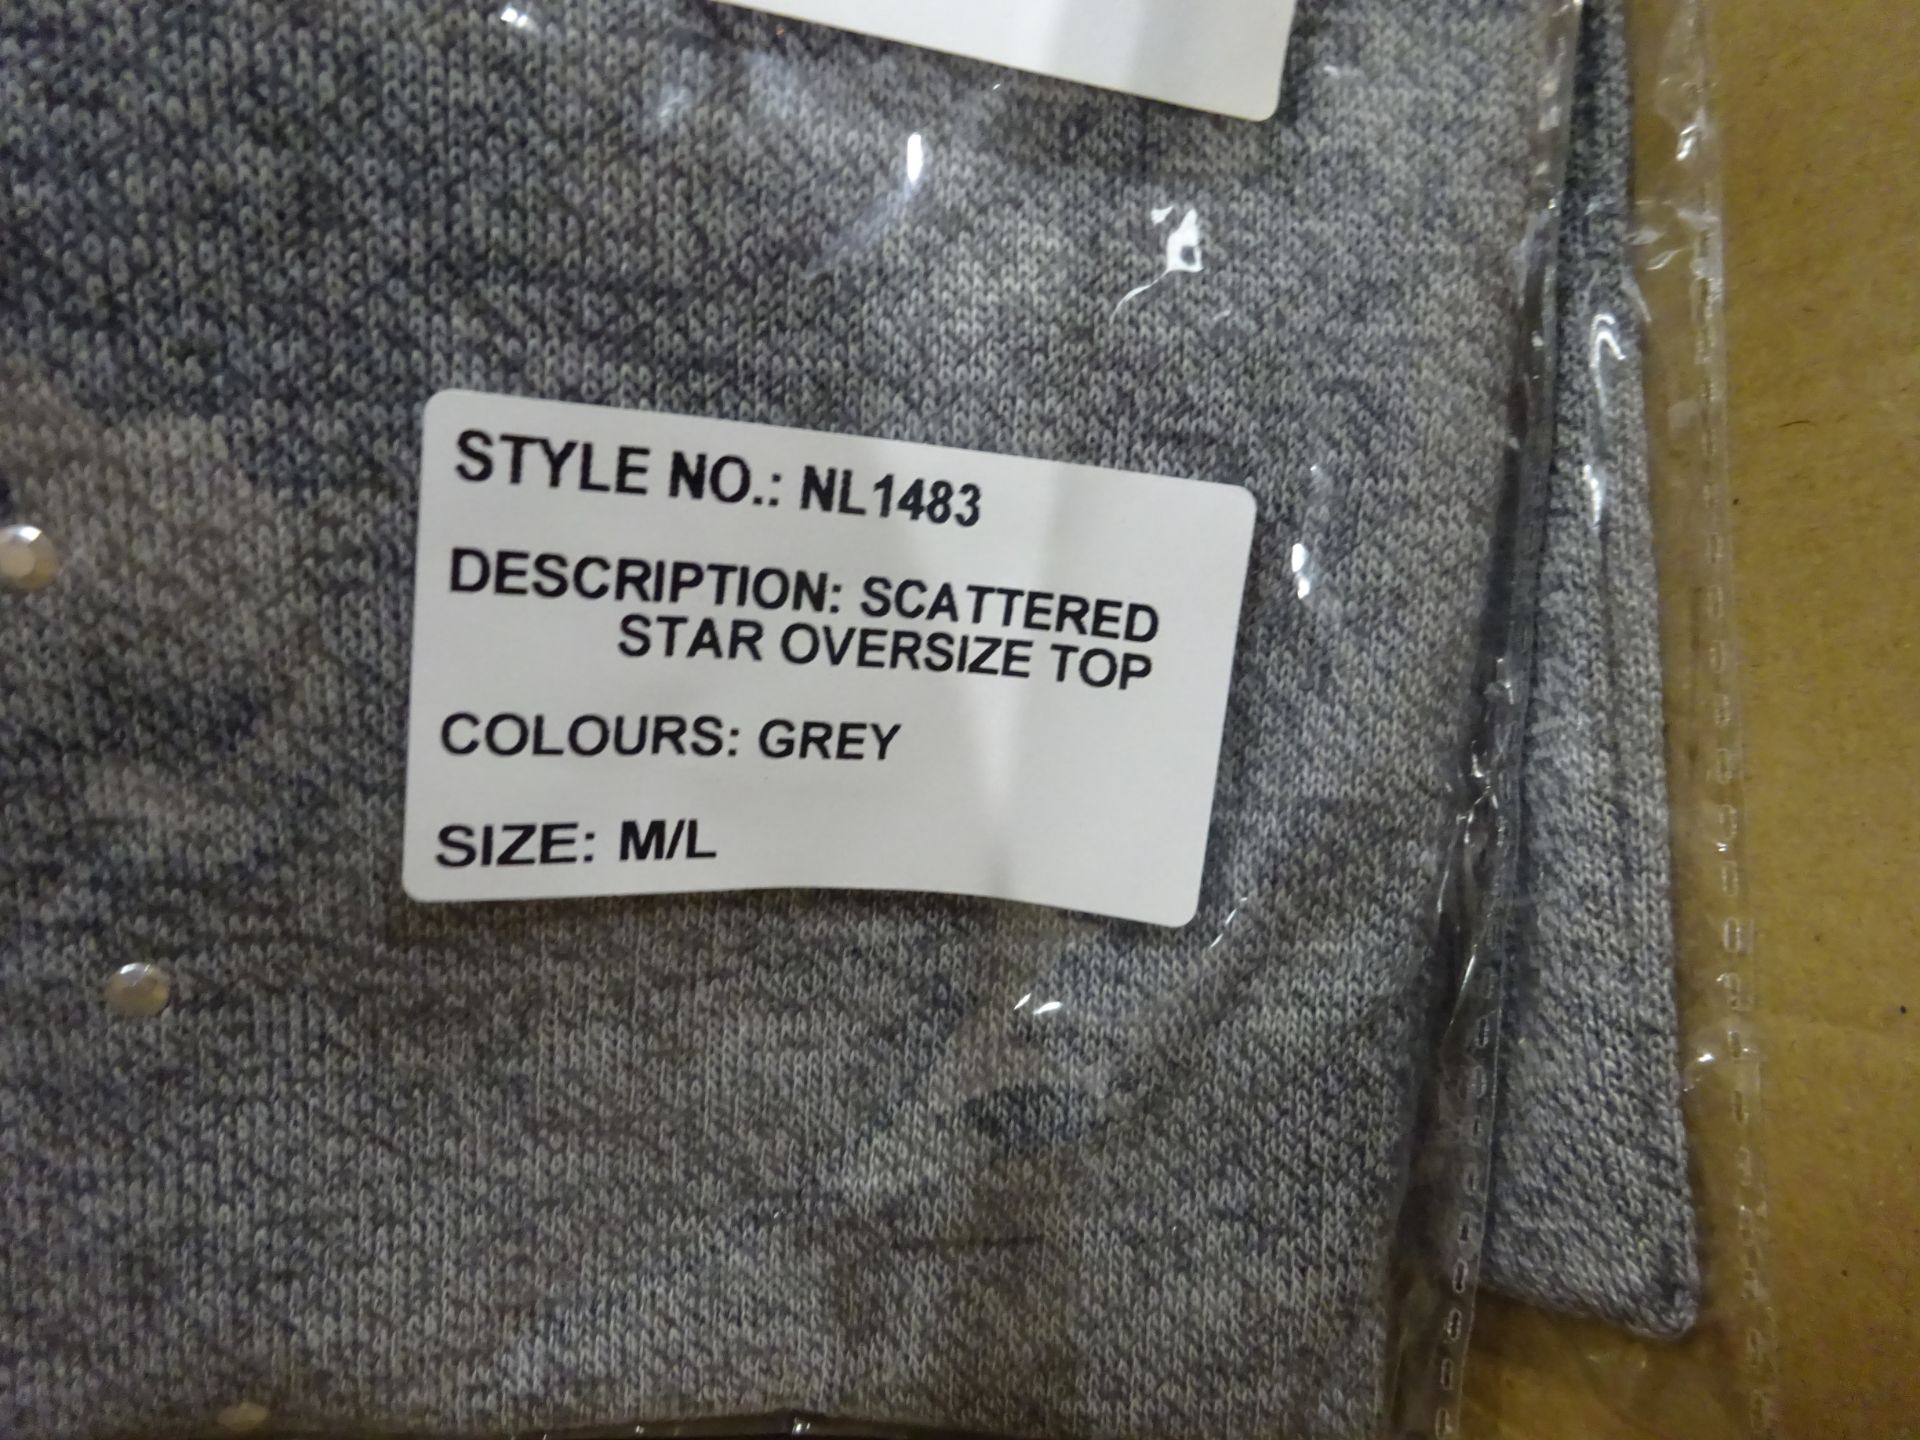 BOX OF 12 NEW GREY SCATTERED STAR OVERSIZED TOPS (M/L - Image 2 of 2